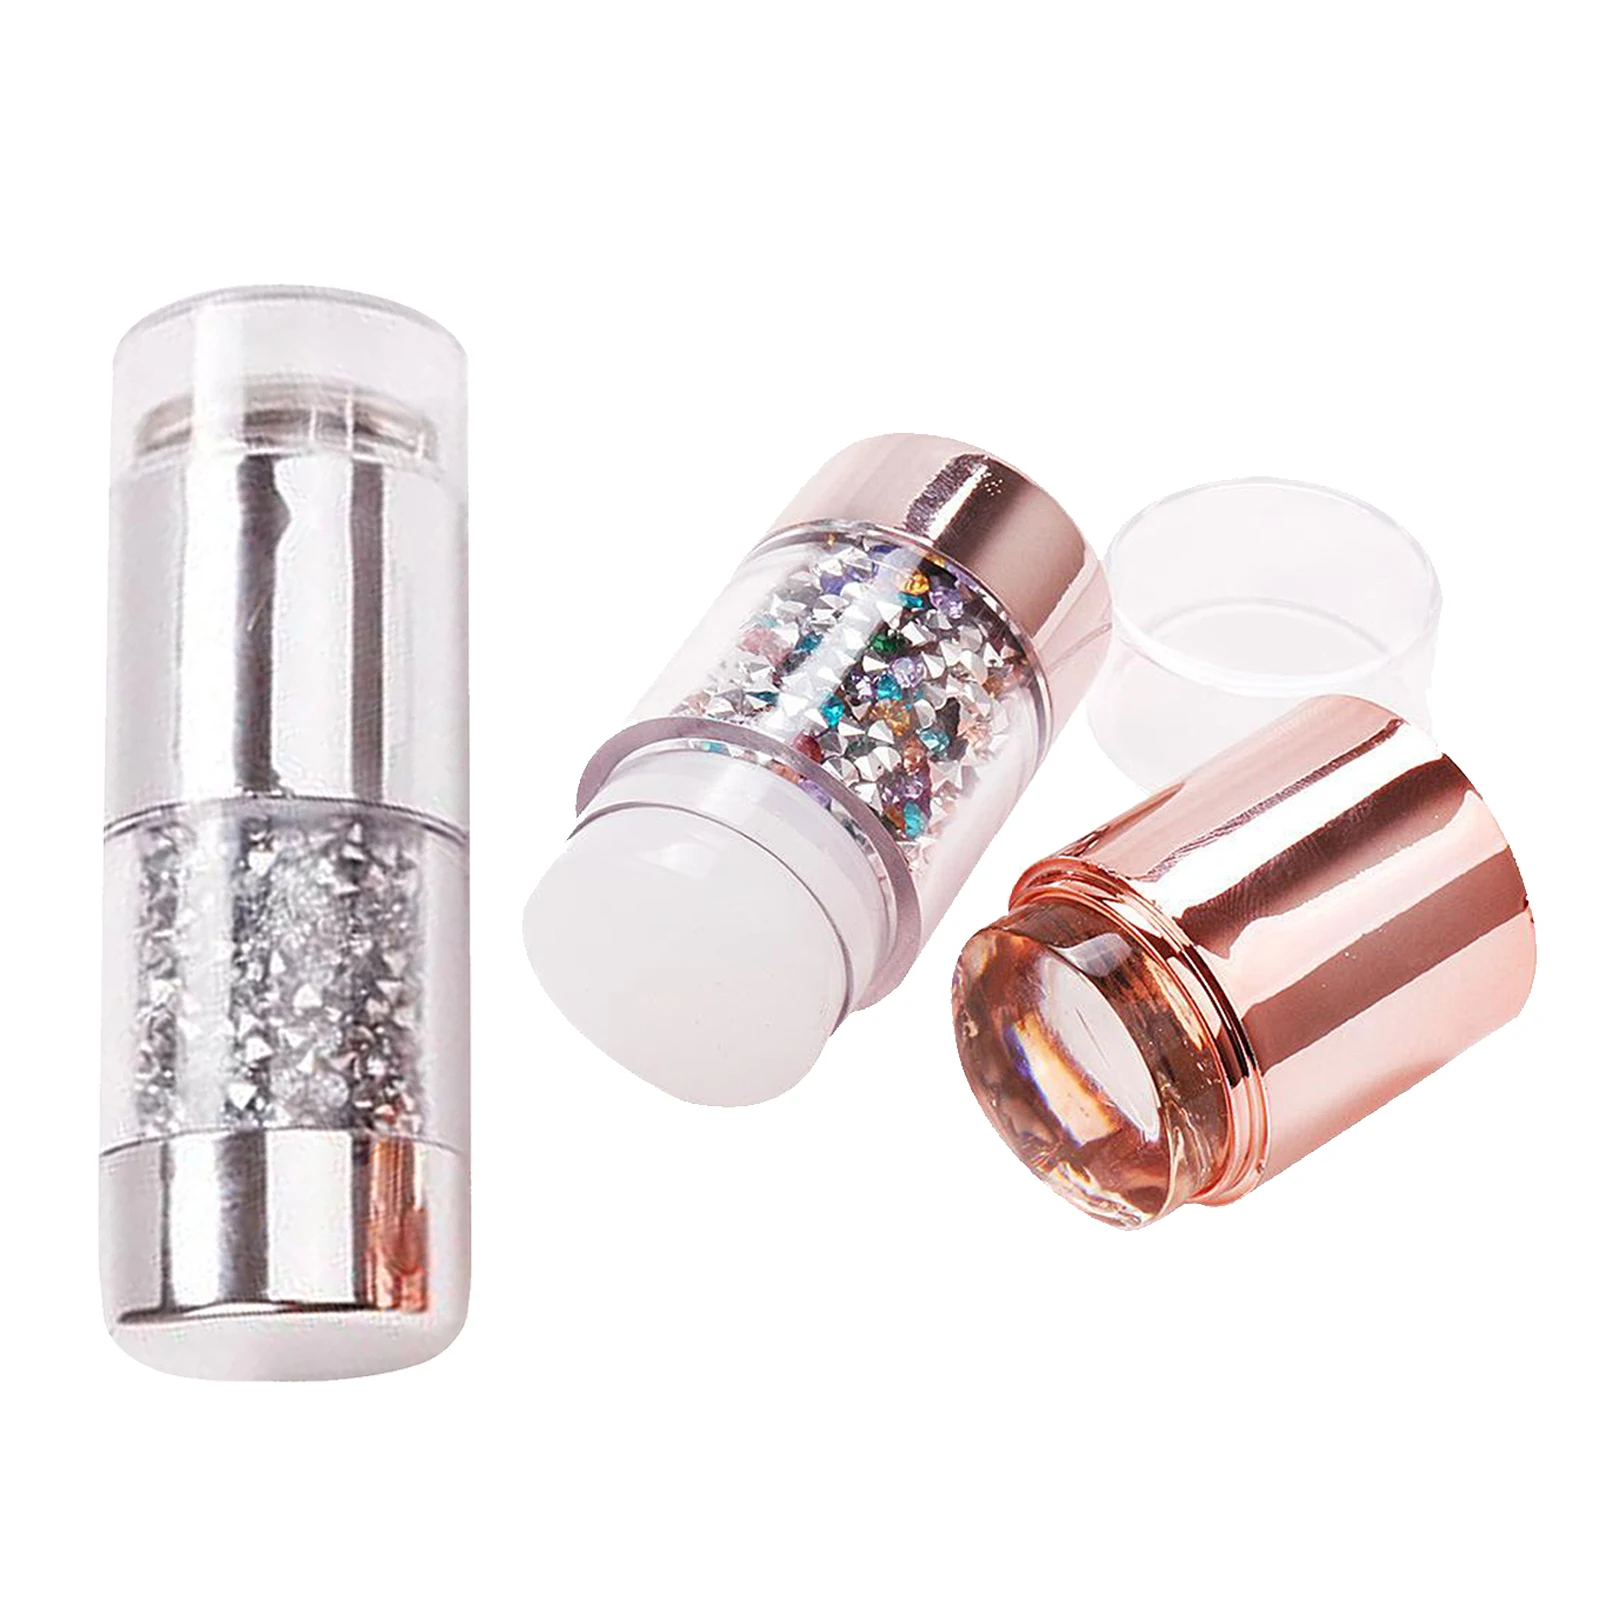 Double-ended Silicone Nail Stamper Stamping Set Jelly Crystal Handle with Cap Nail Art Stamp Image Stencil Scraper Tools